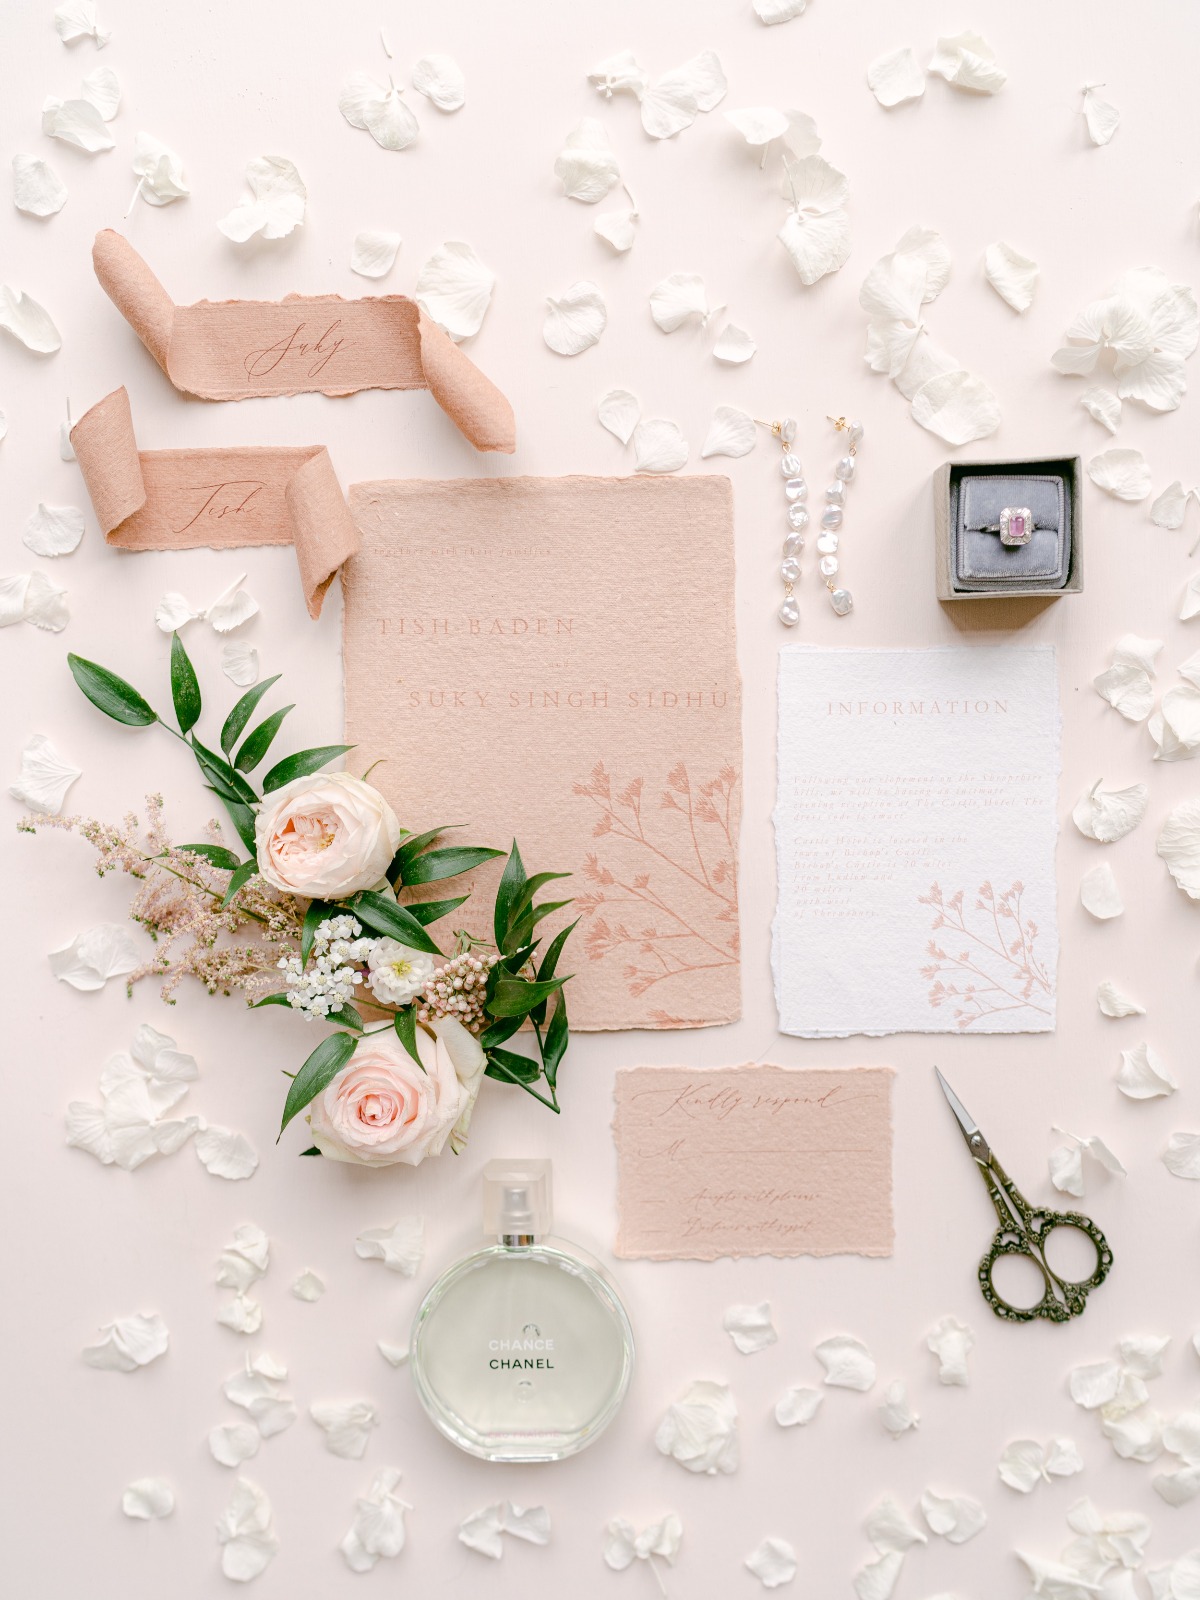 luxury-elopement-photographer-in-the-eng